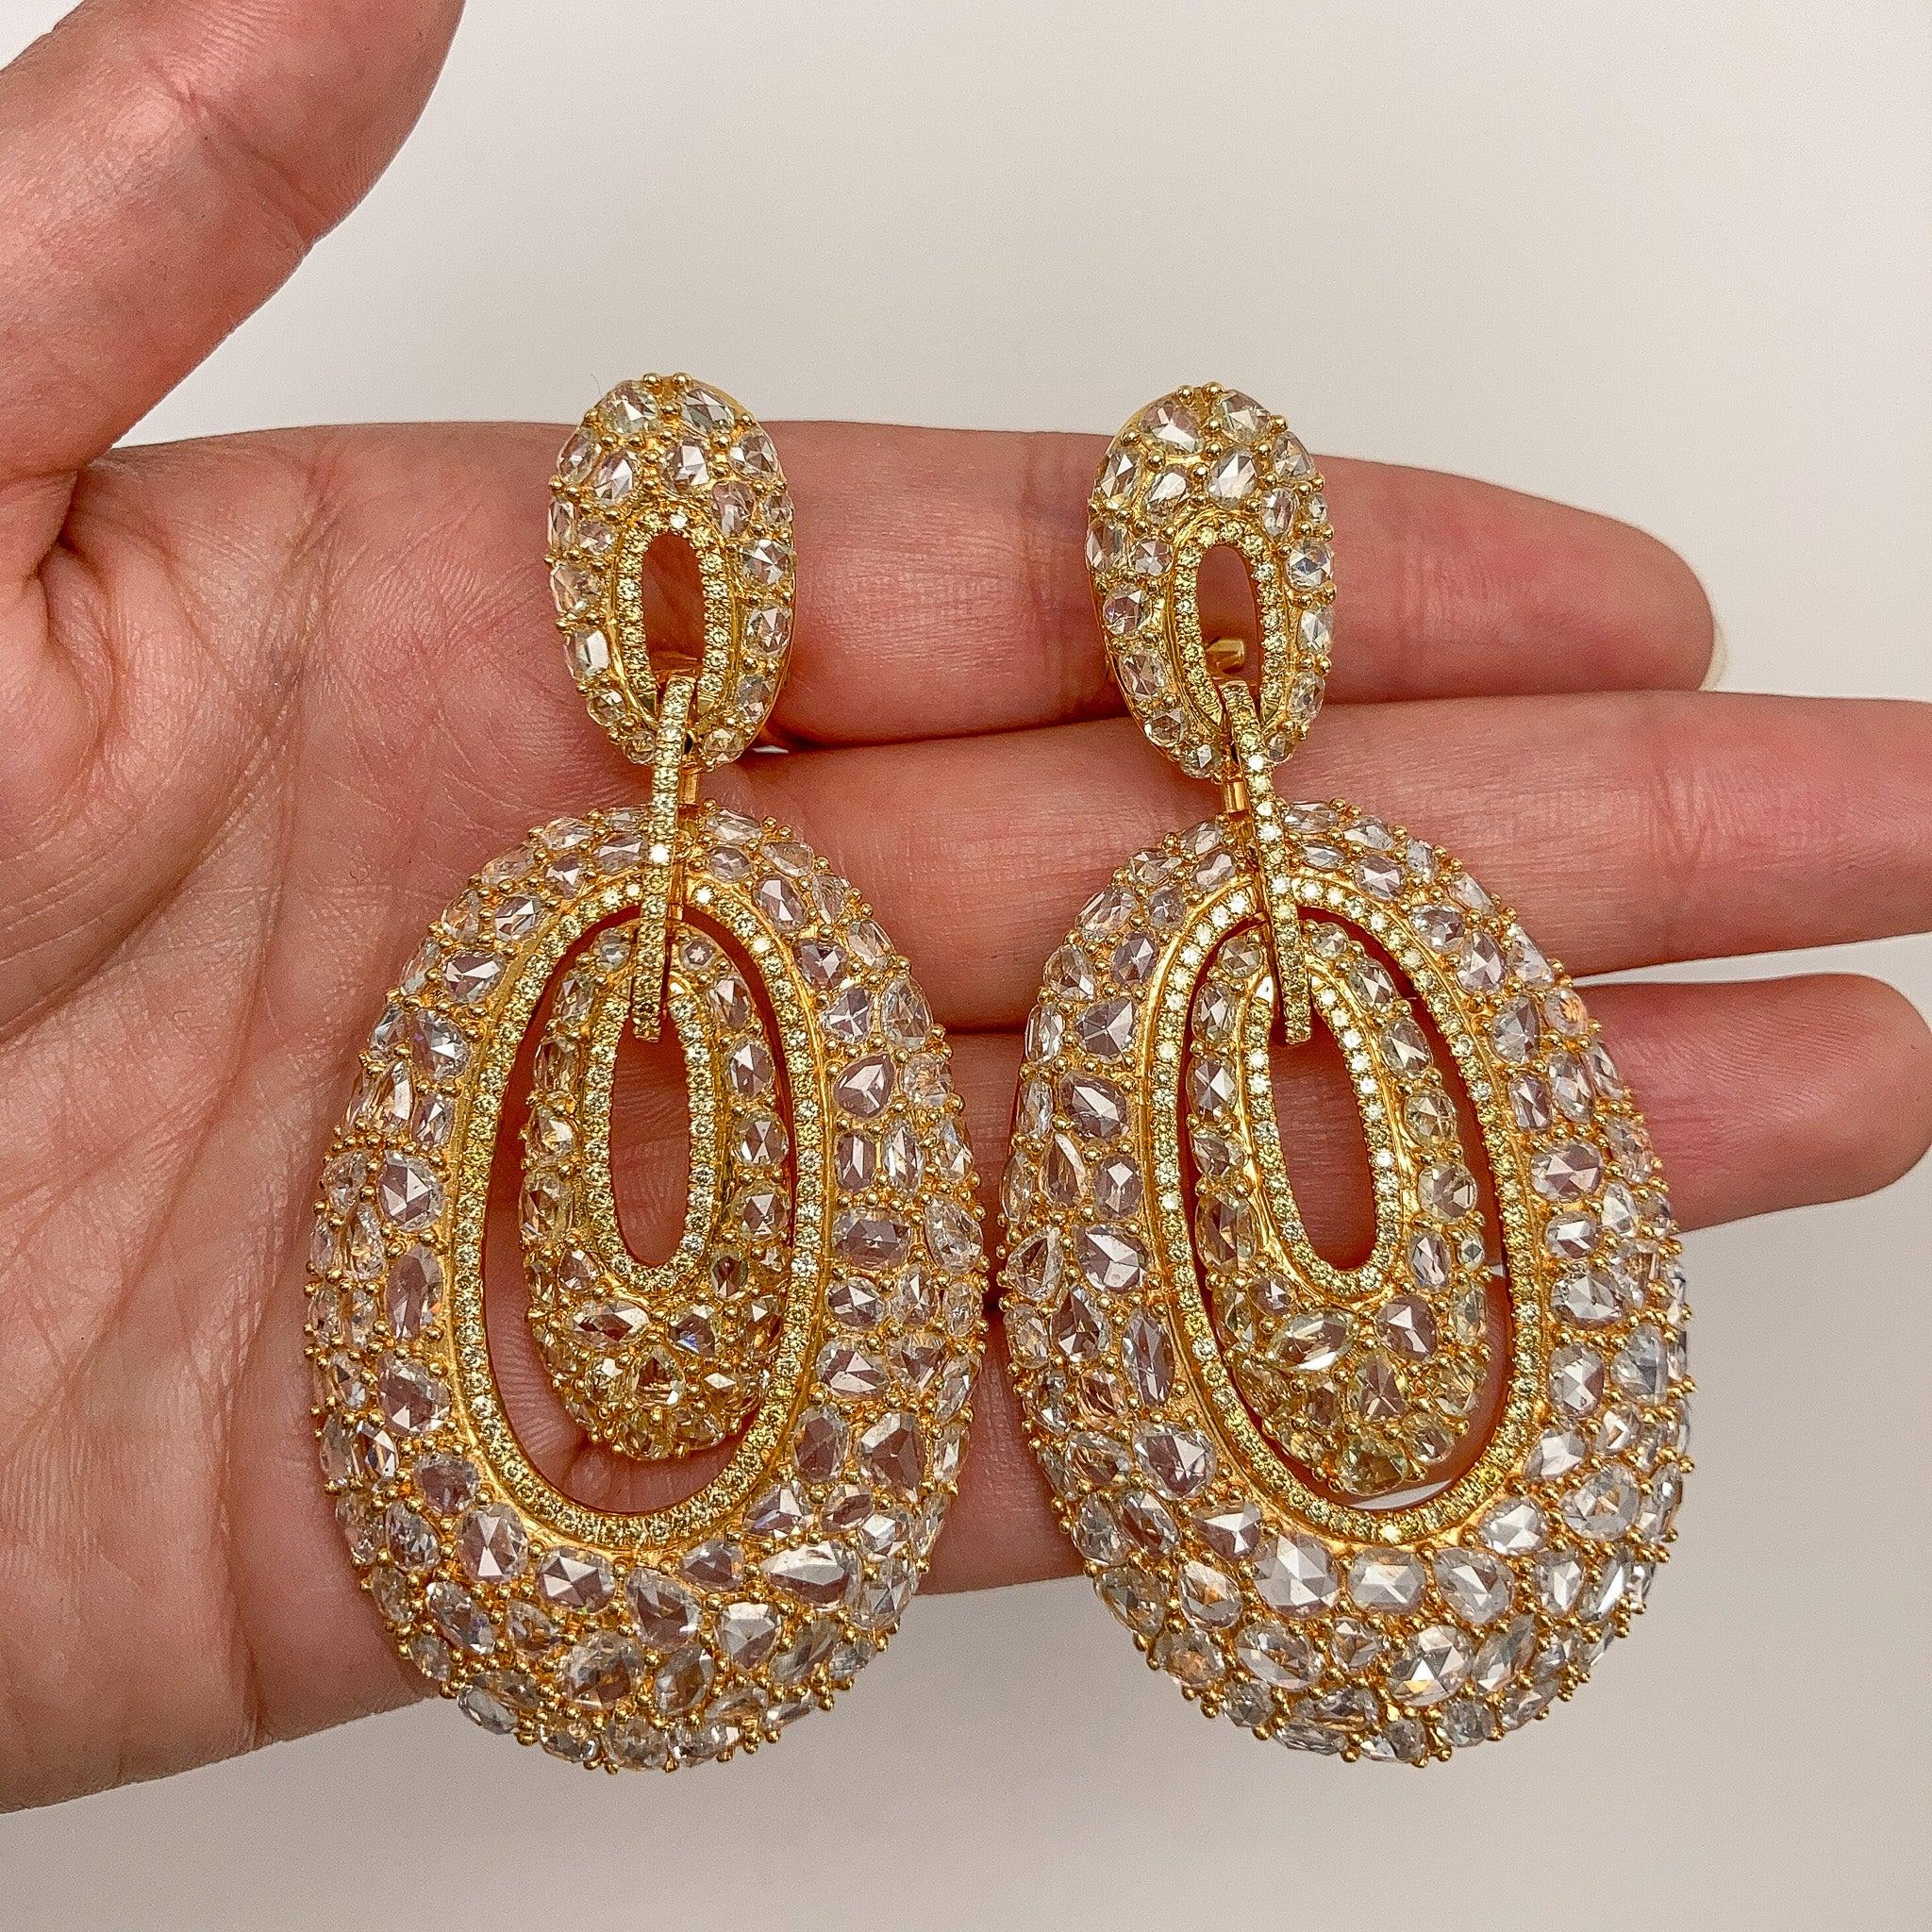 Diana M.  24cts Rose Cut Diamond Chandelier Earrings, 18k G-H Color VS Clairty  For Sale 1